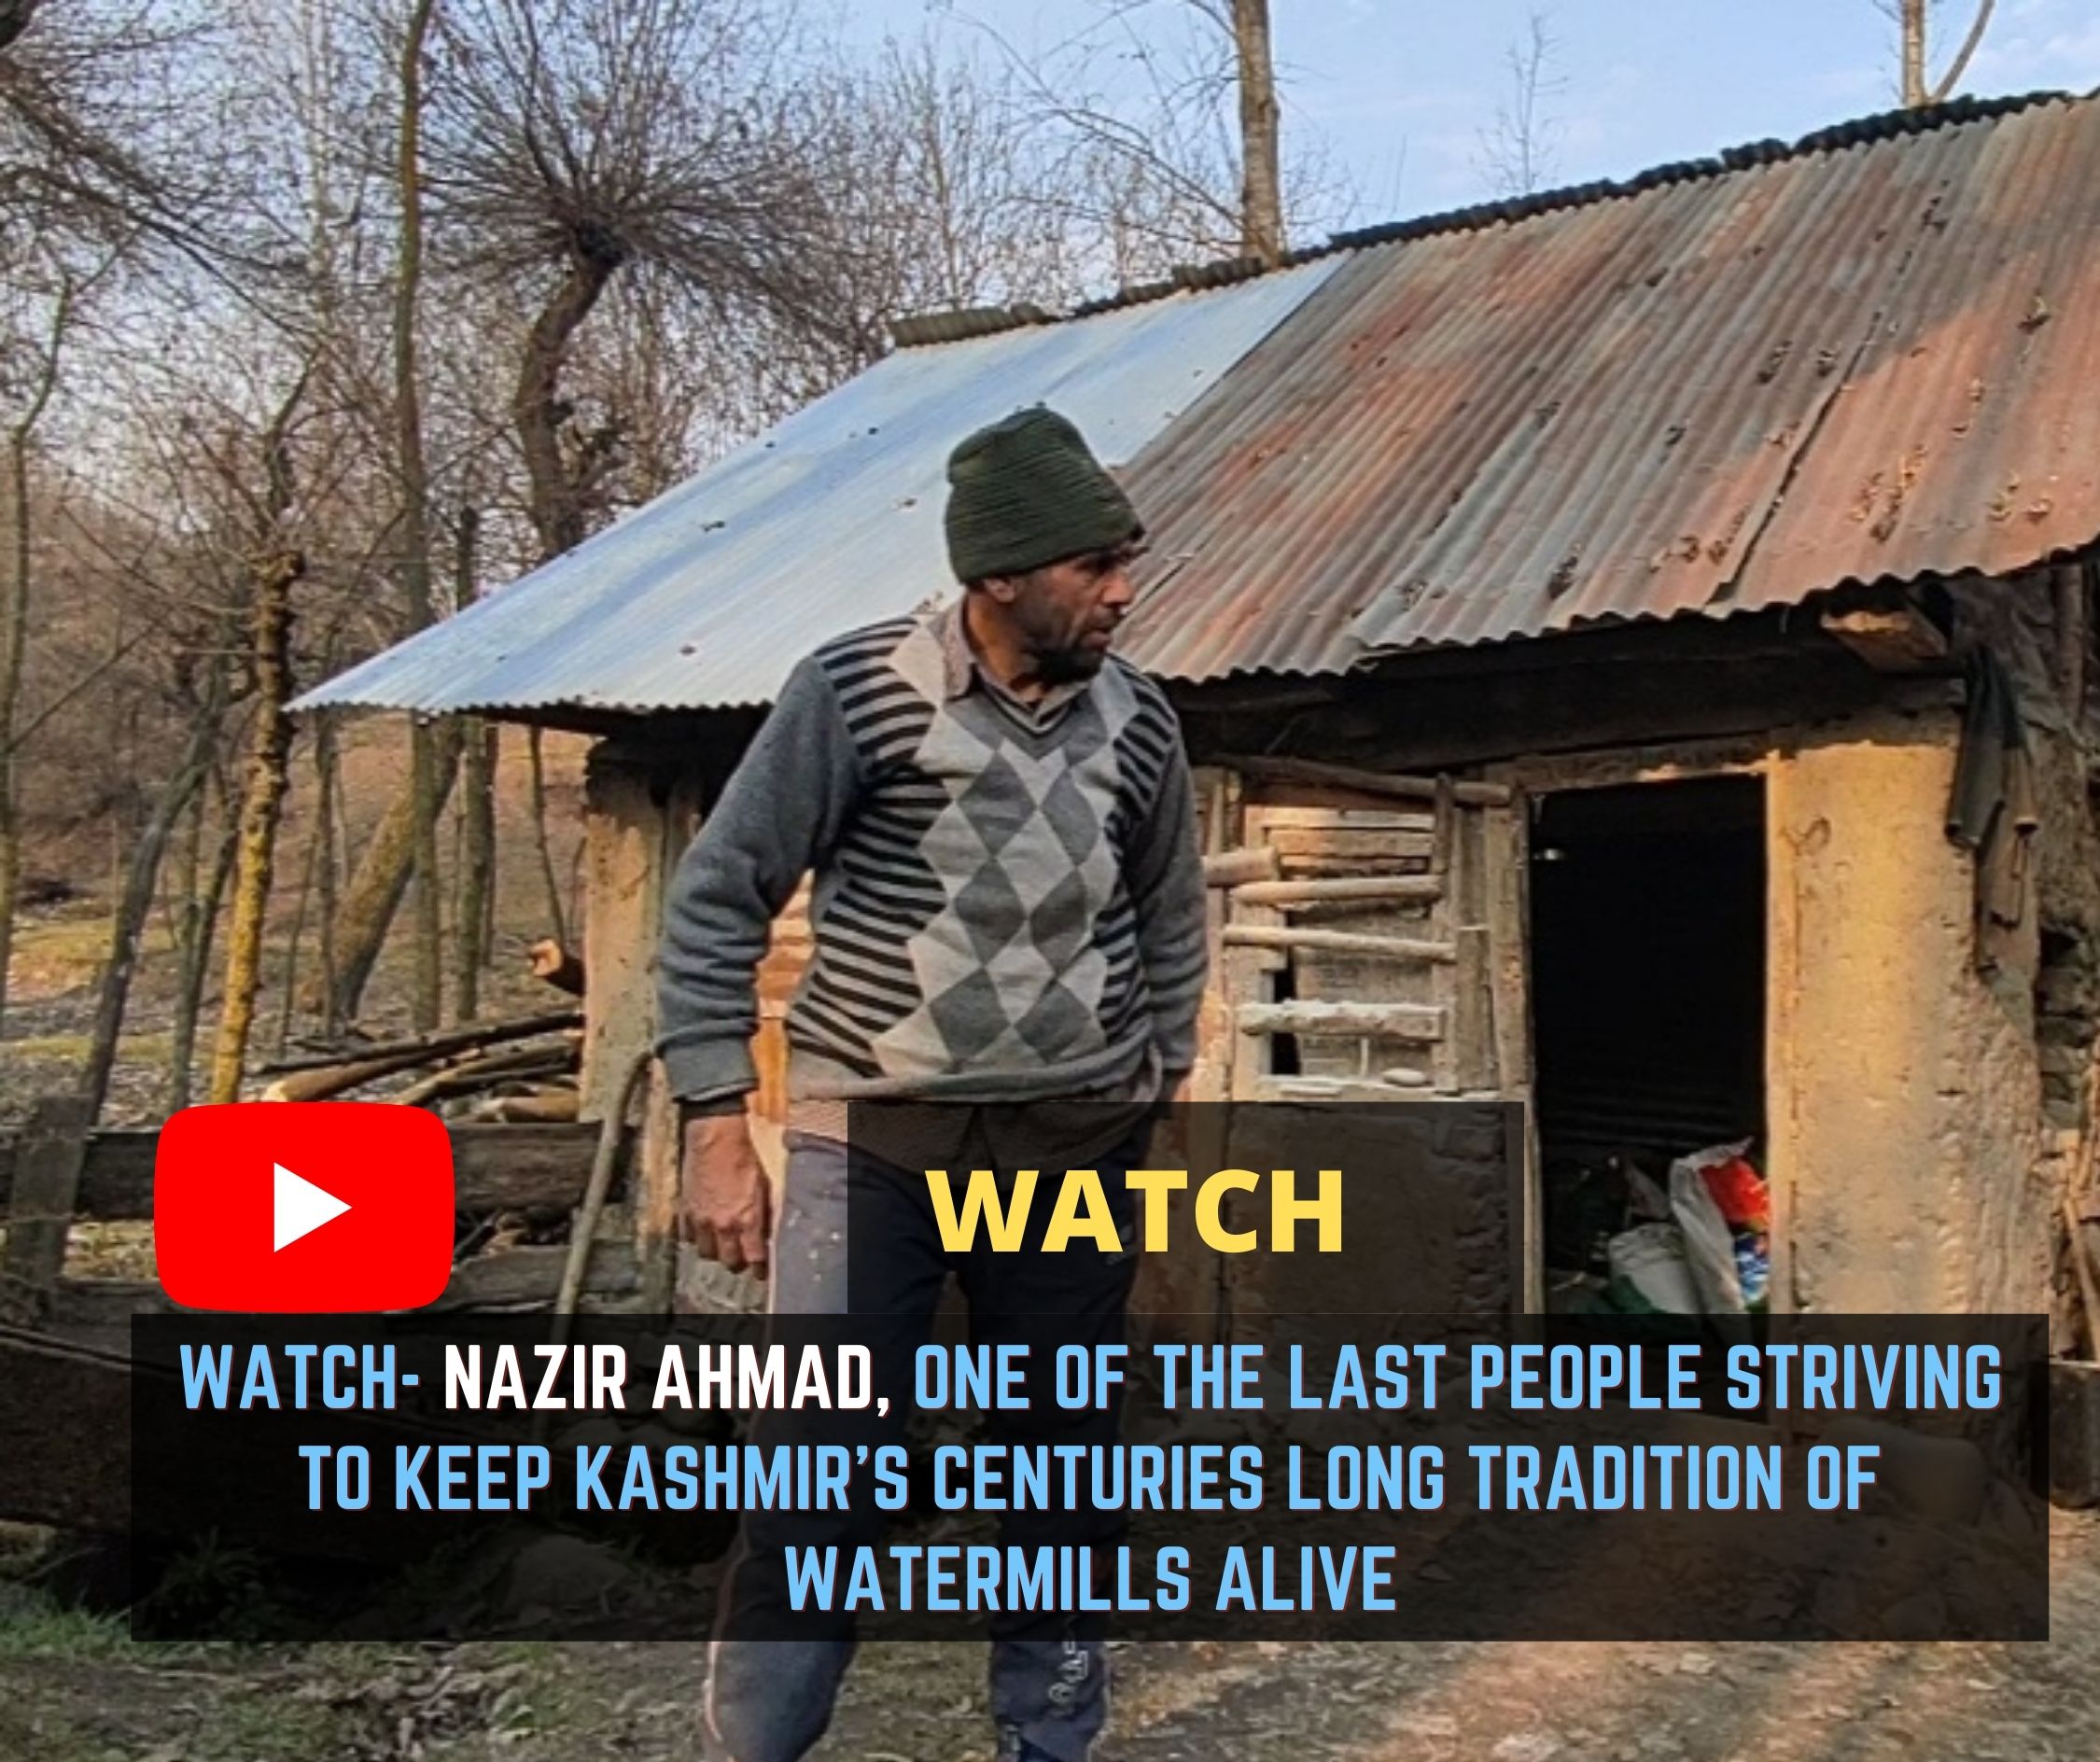 Watch- Nazir Ahmad, one of the last people striving to keep Kashmir’s centuries long tradition of Watermills alive